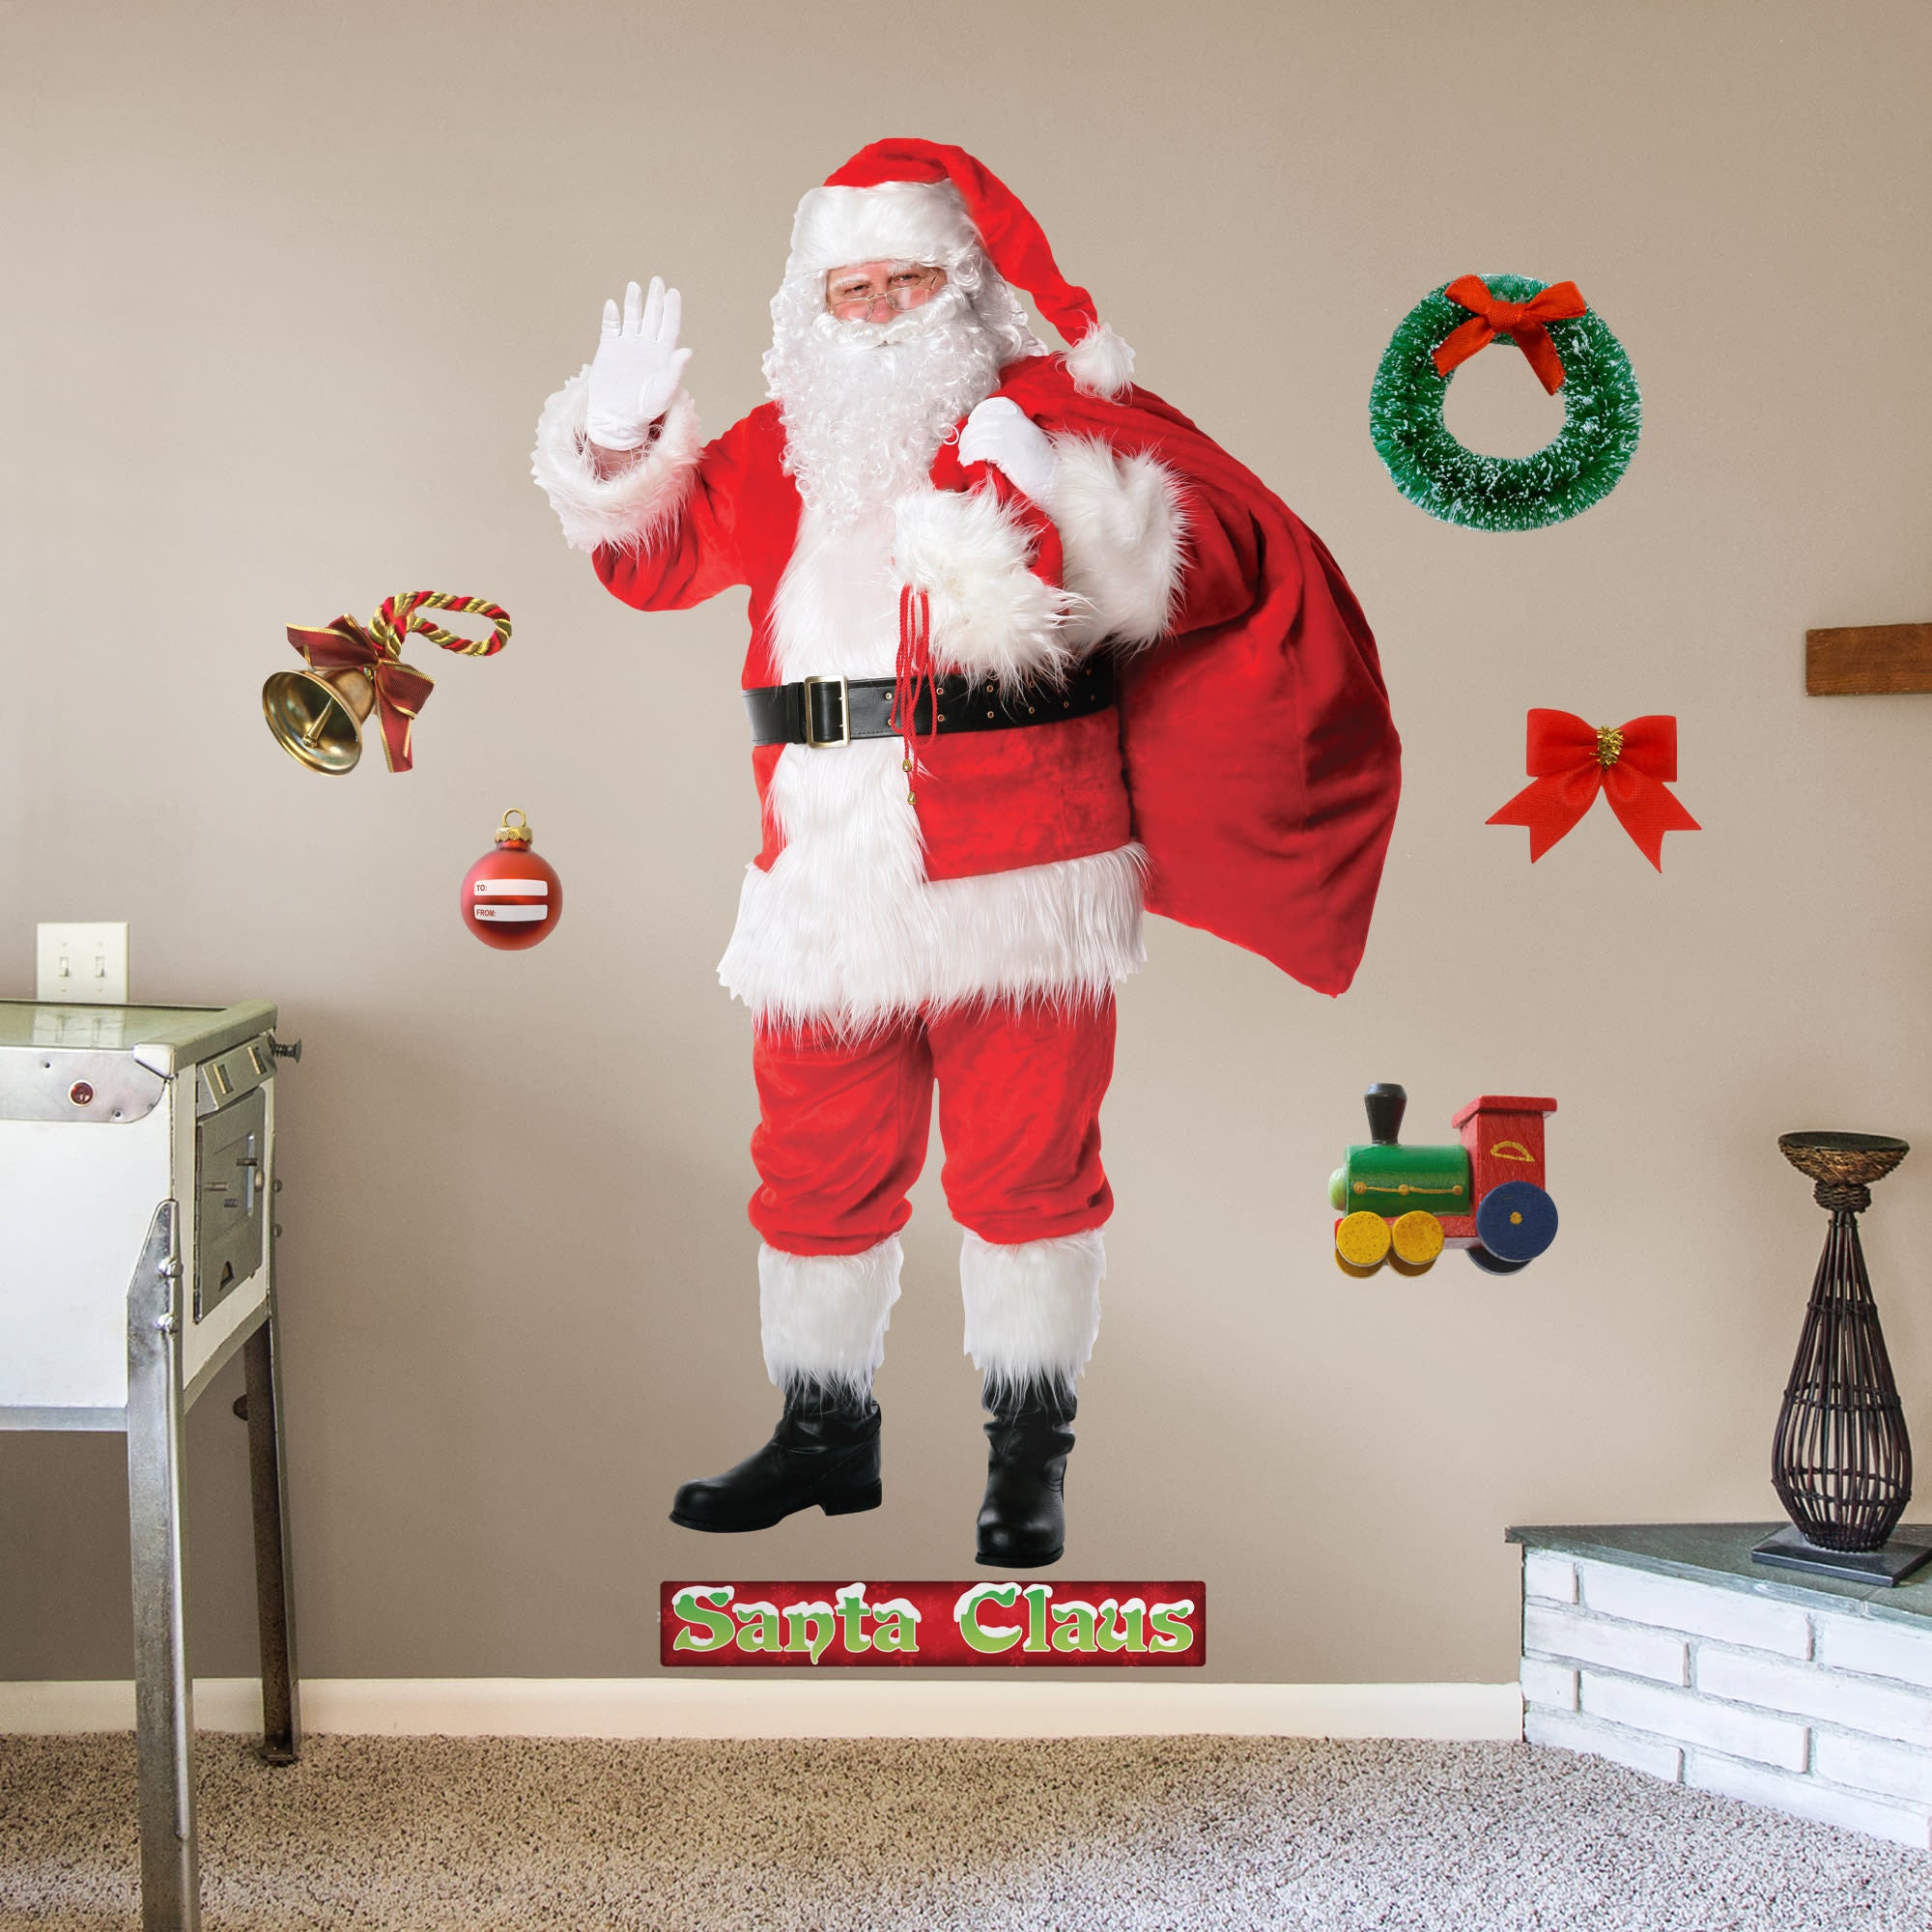 Santa Claus - Removable Wall Decal Life-Size Character + 8 Licensed Decals (46"W x 75"H) by Fathead | Vinyl